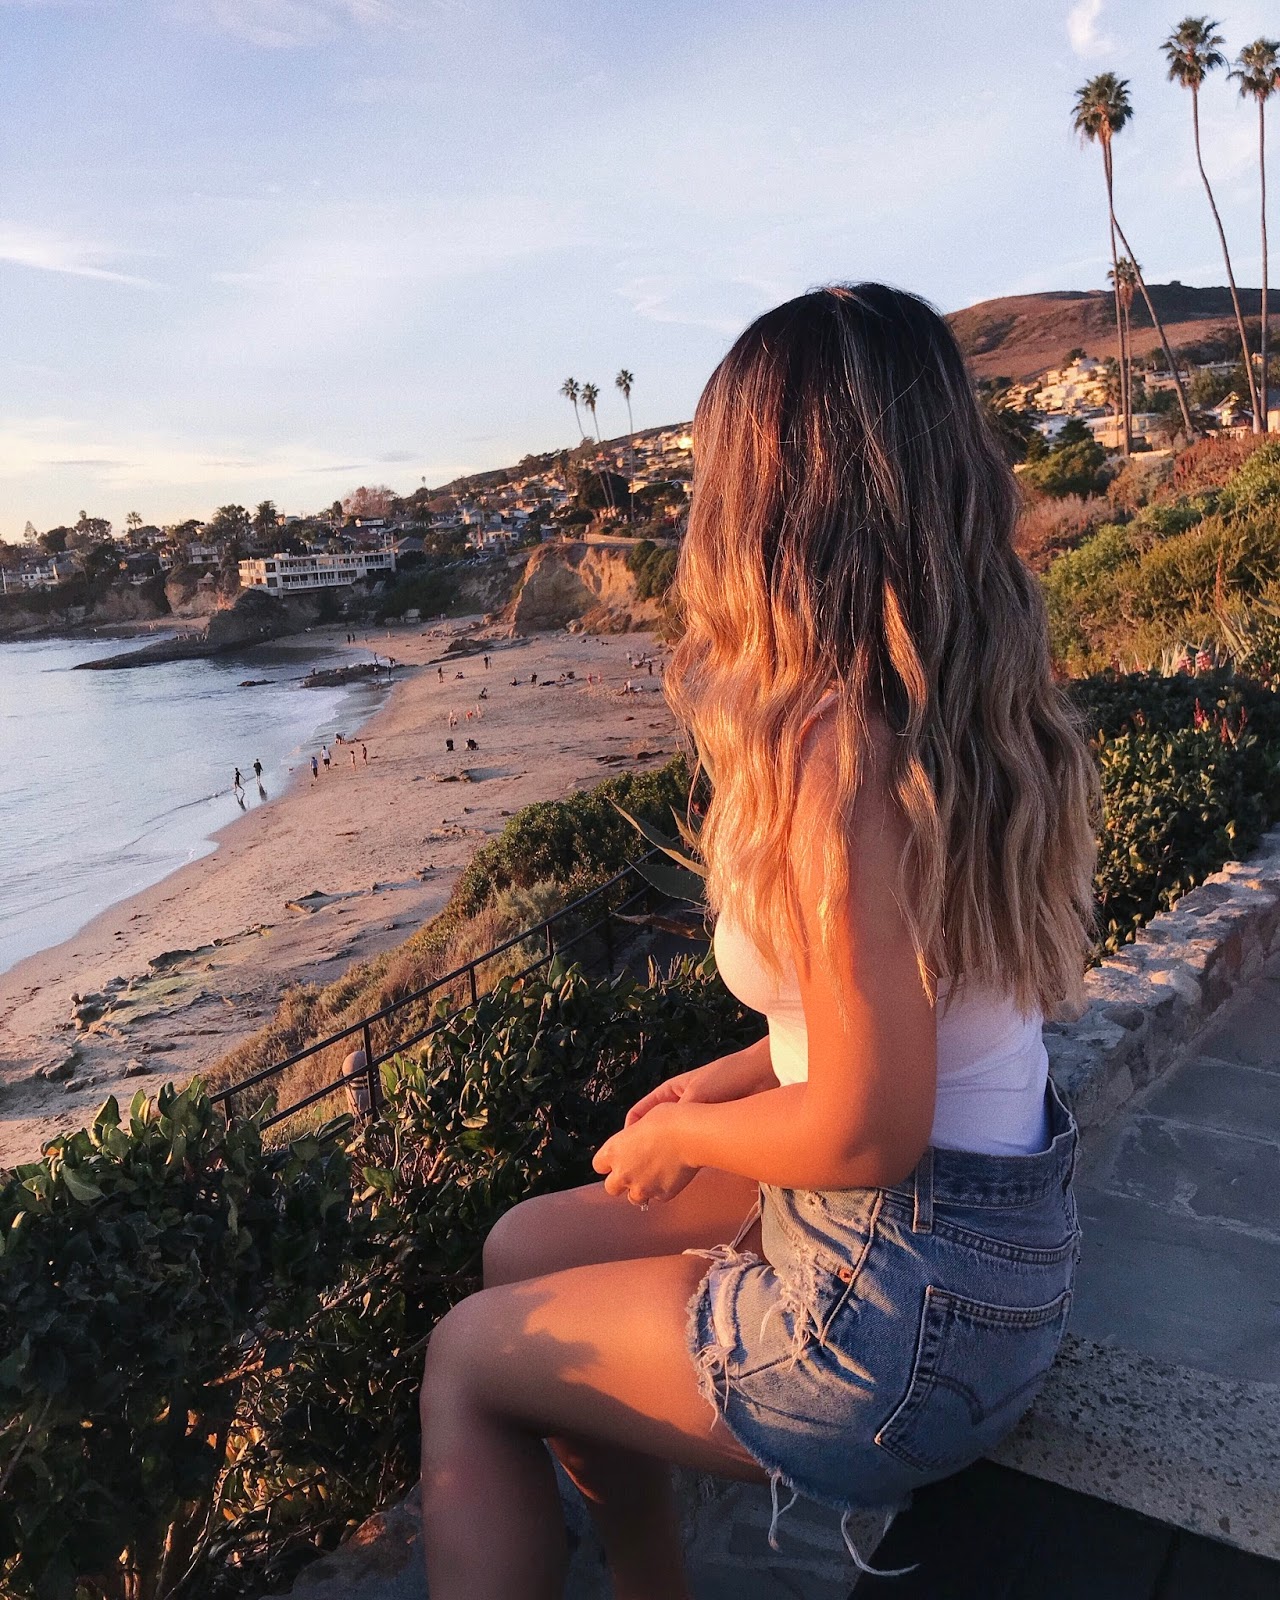 laguna beach, laguna beach outfit, laguna beach shopping, California, west coast living, winter in California, jean shorts, denim, tank top, Levi's shorts, boohoo tank top, outfit of the day, shopping, beach day outfit, casual, affordable, fashion blogger, Persian, blonde hair,